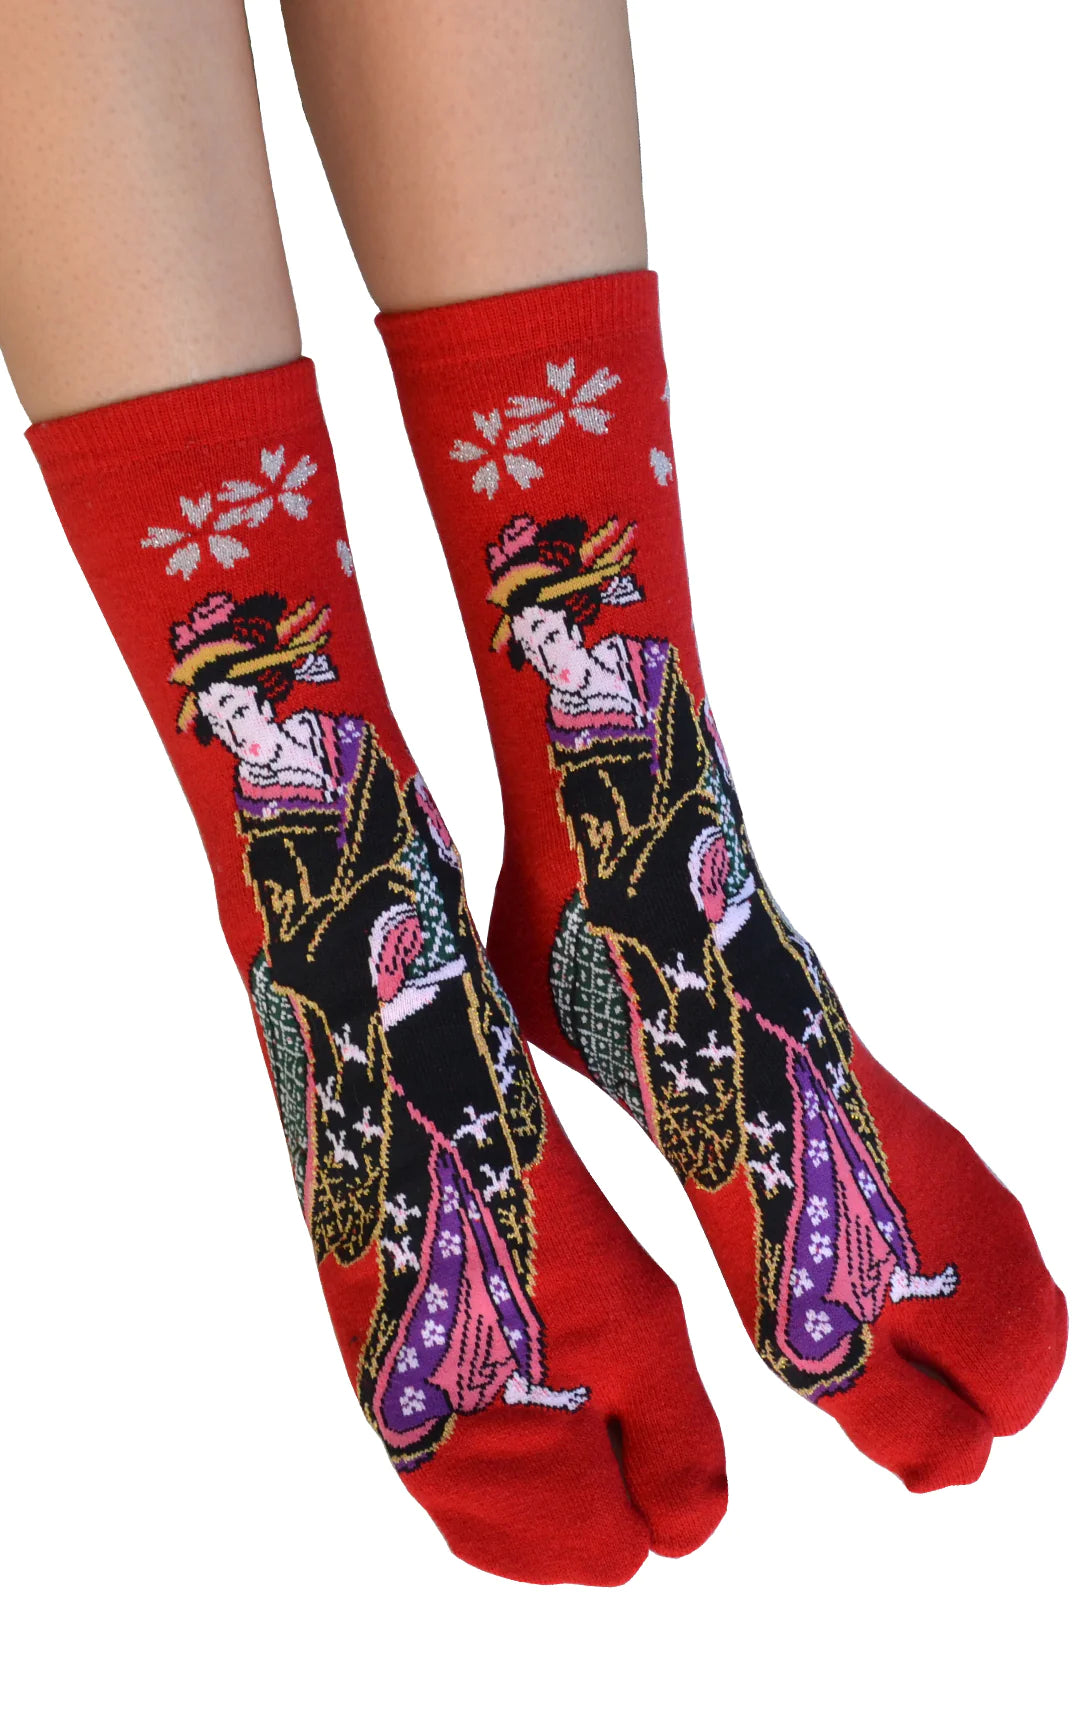 This is a photo of a woman's leg wearing the red color of the product name KABUKI TABI TOE SOCKS of the brand name NINJA SOCKS